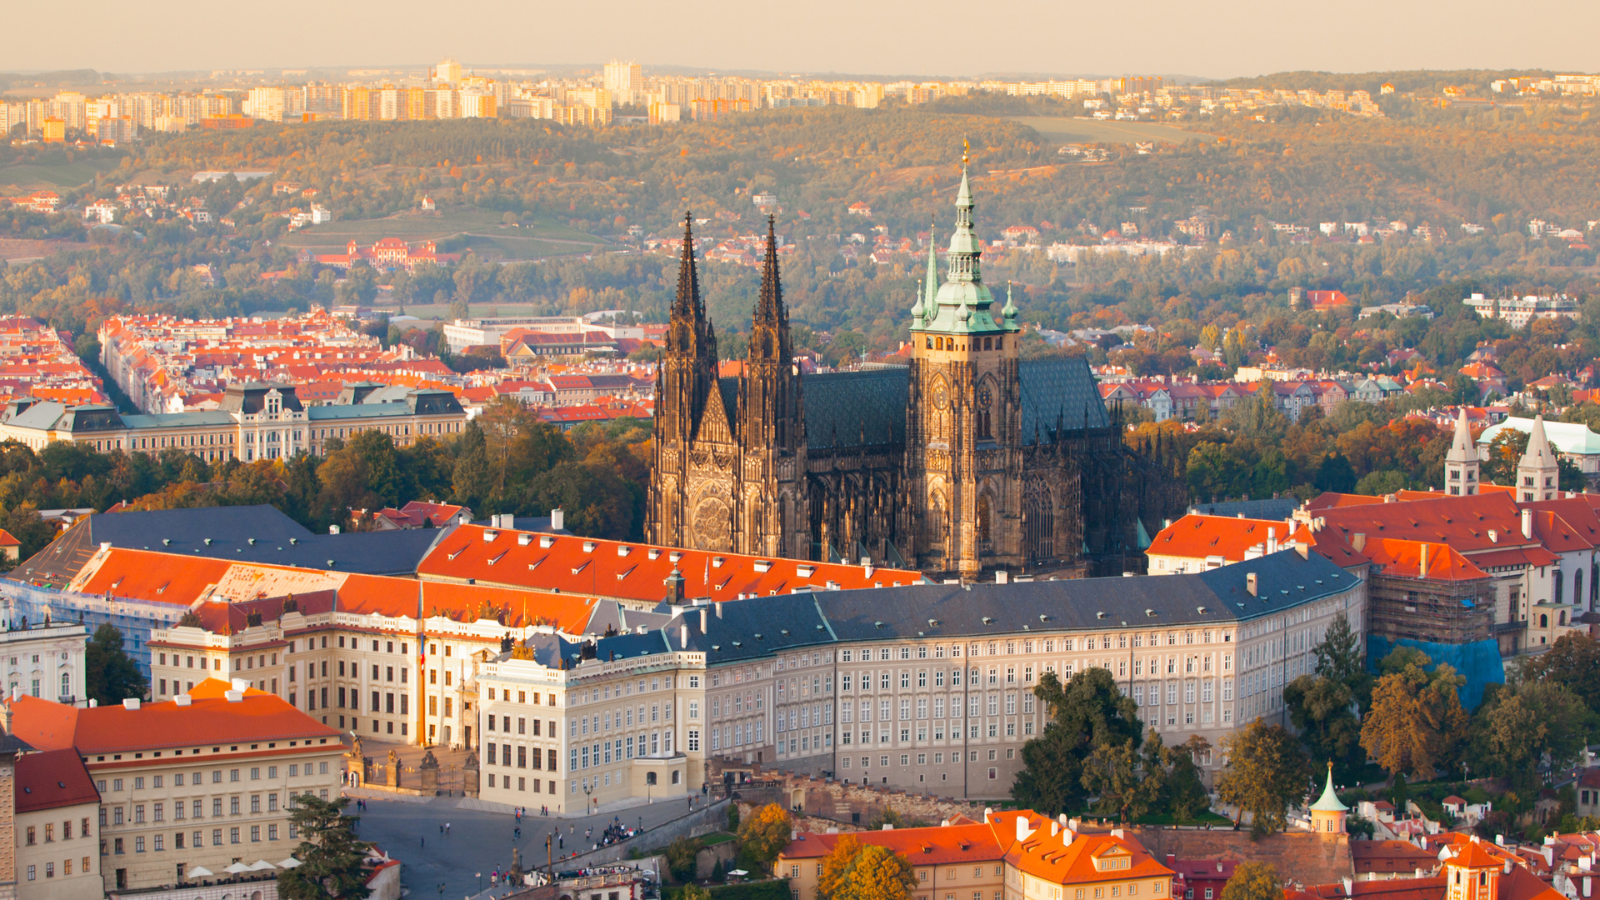 First option in the list of 10 options to see in Prague in 1 day - Prague Castle (Pražský hrad)